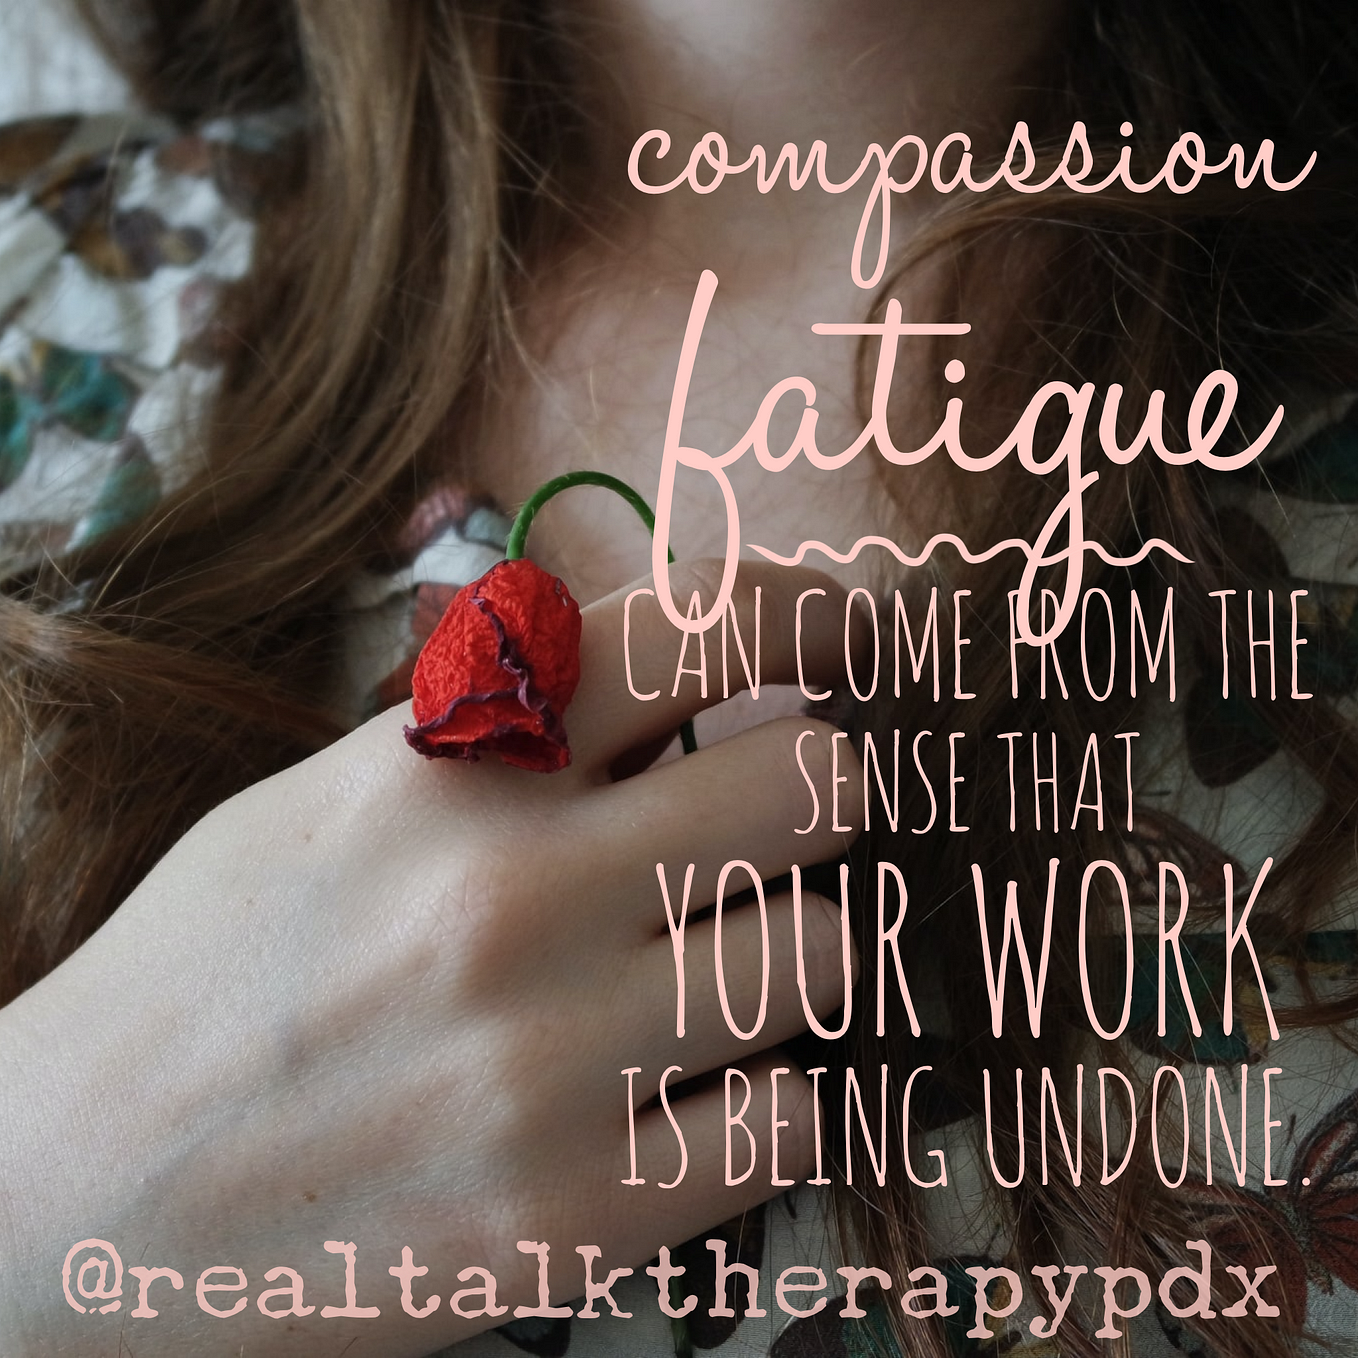 Compassion fatigue can come from the sense that your work is being undone.